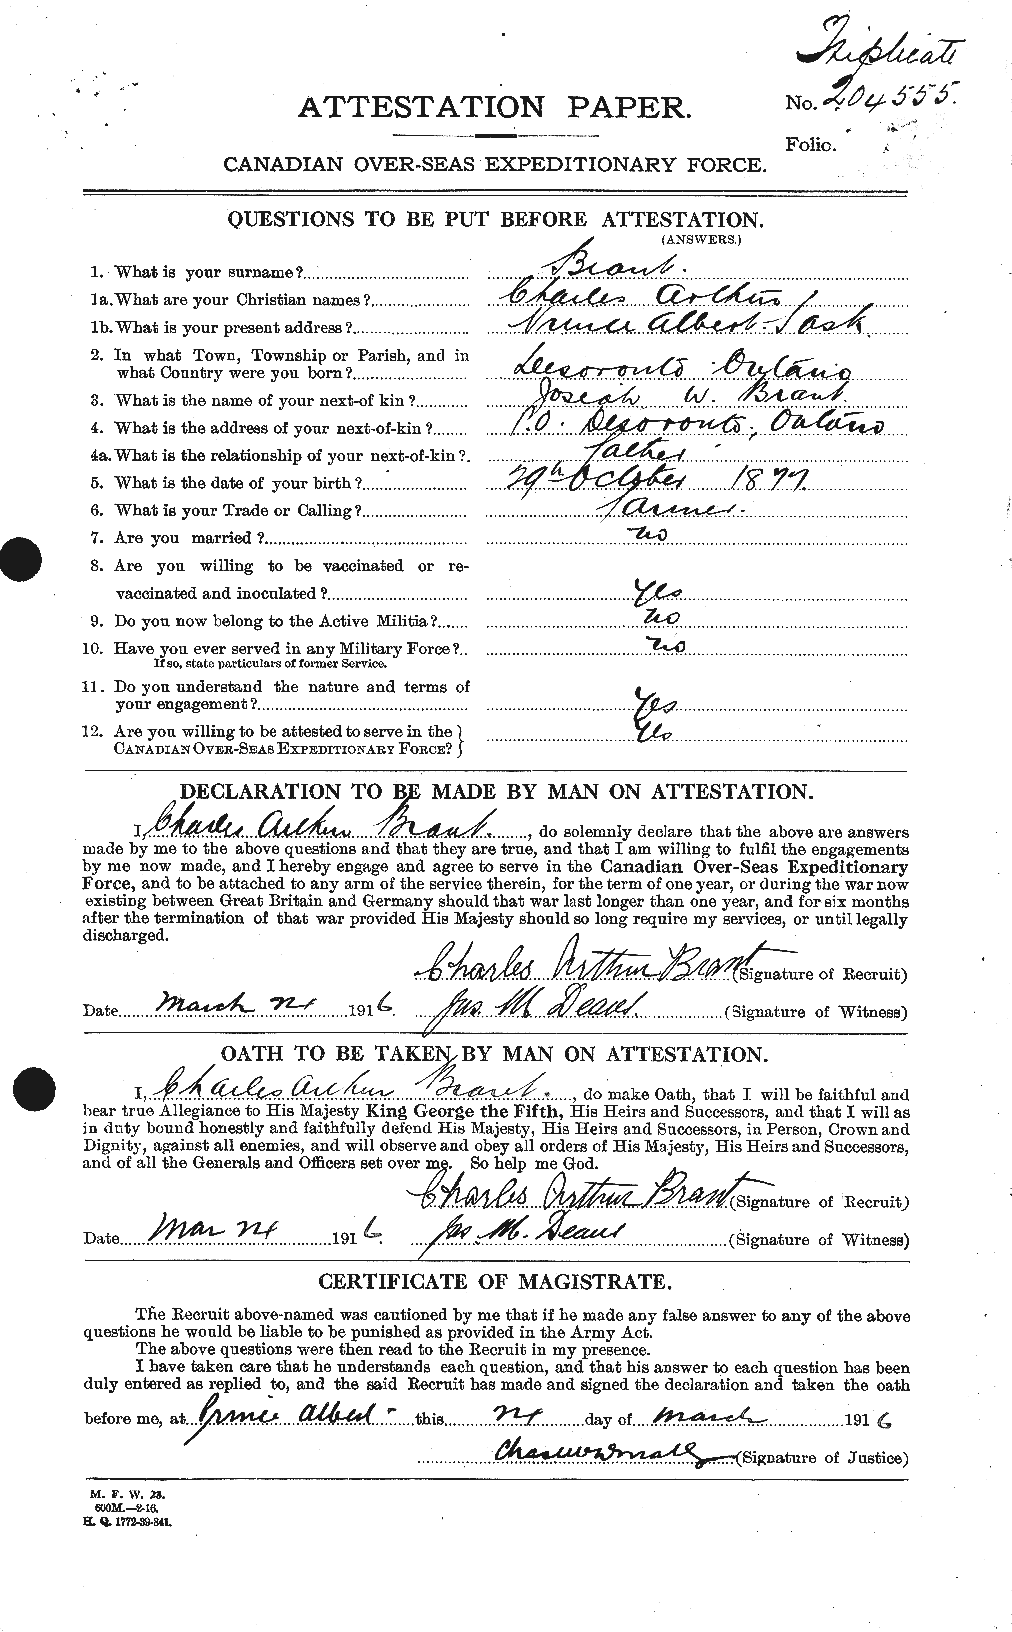 Personnel Records of the First World War - CEF 257840a